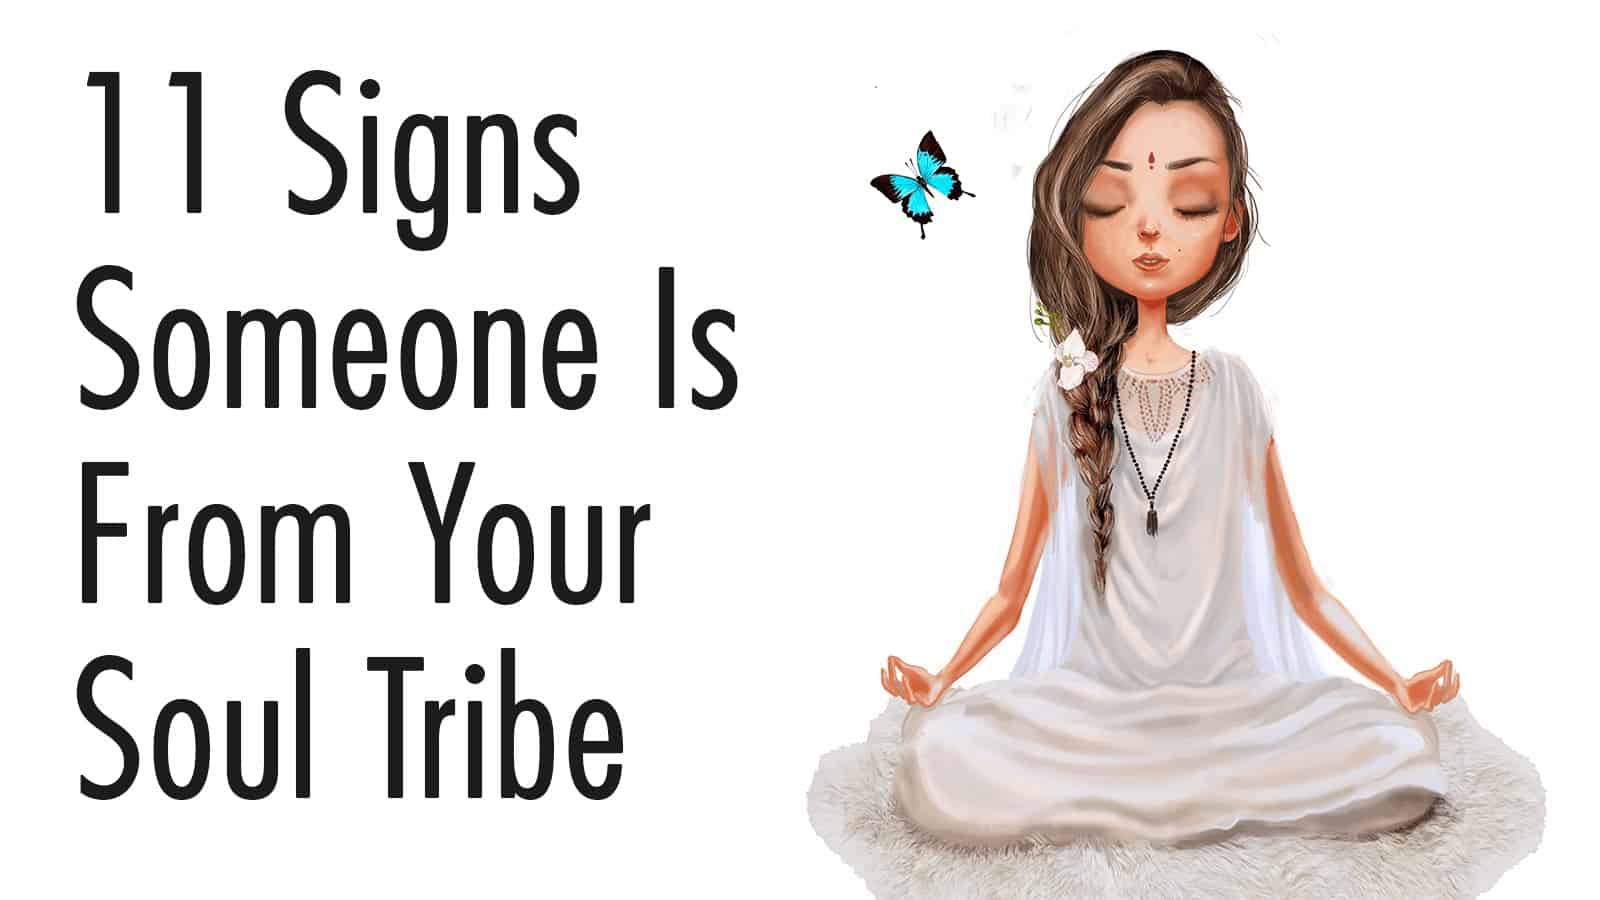 11 Signs Someone Is From Your Soul Tribe